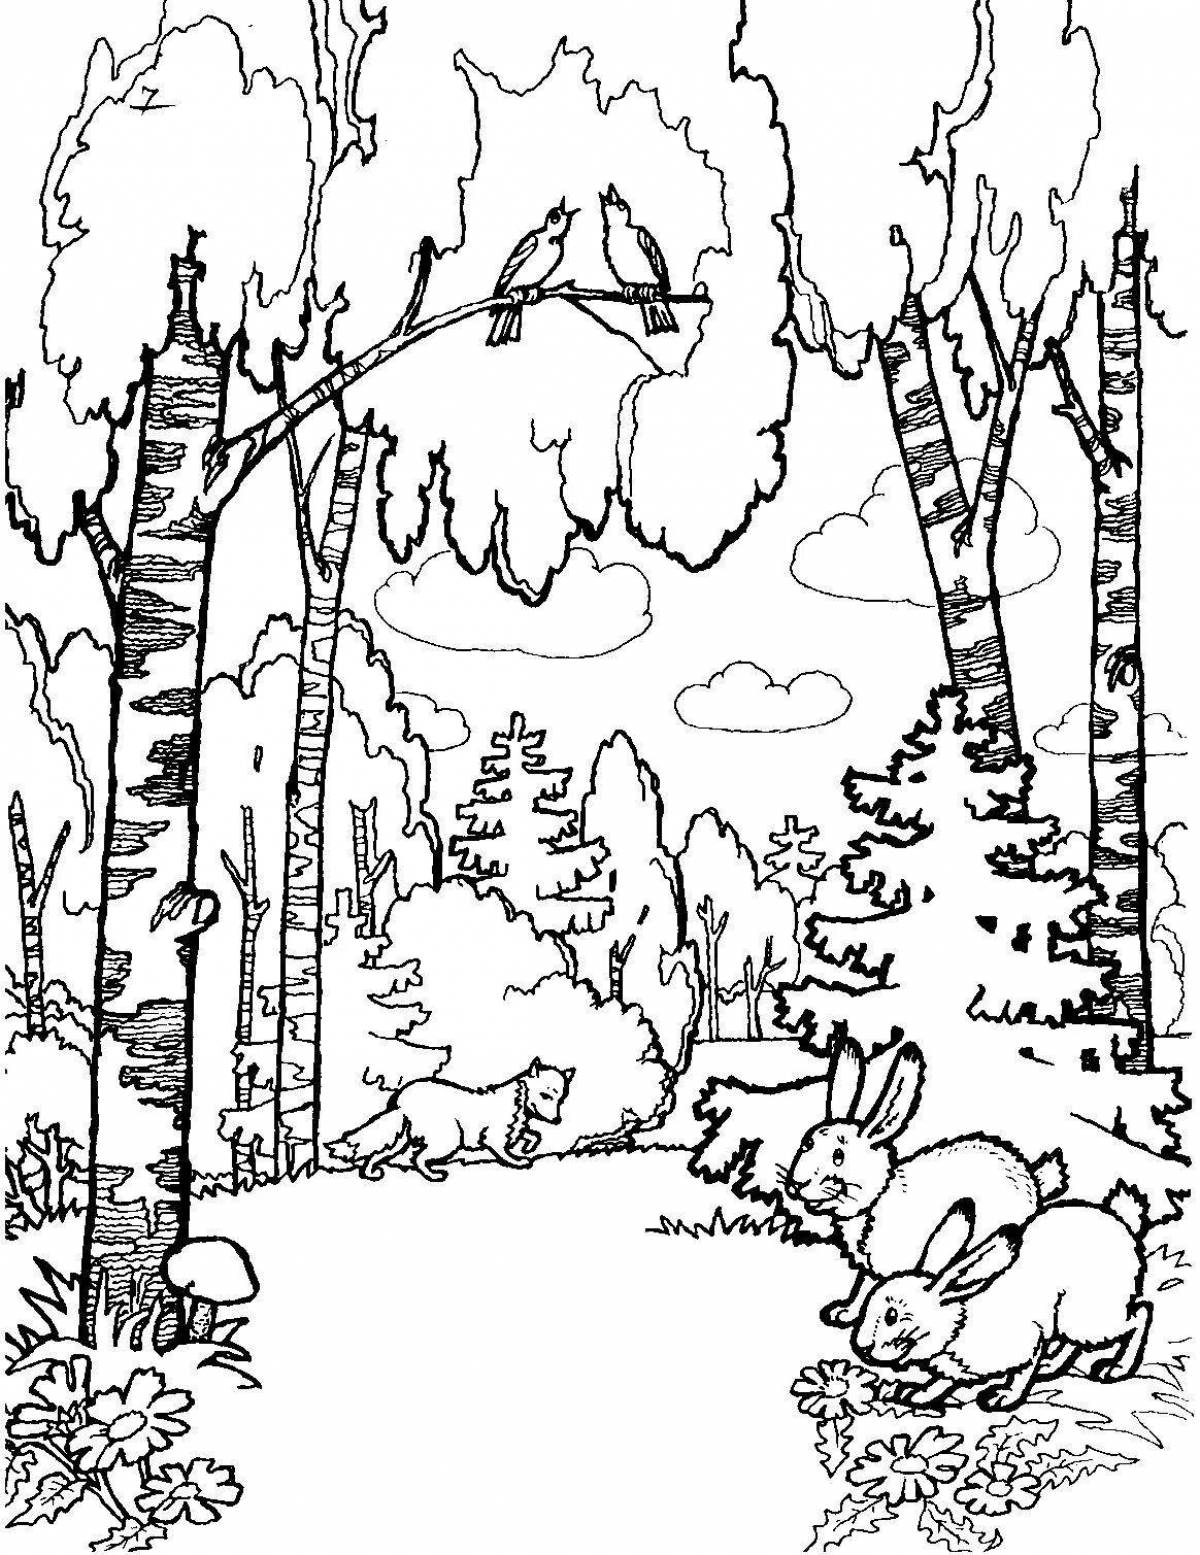 Amazing birch grove coloring page for kids